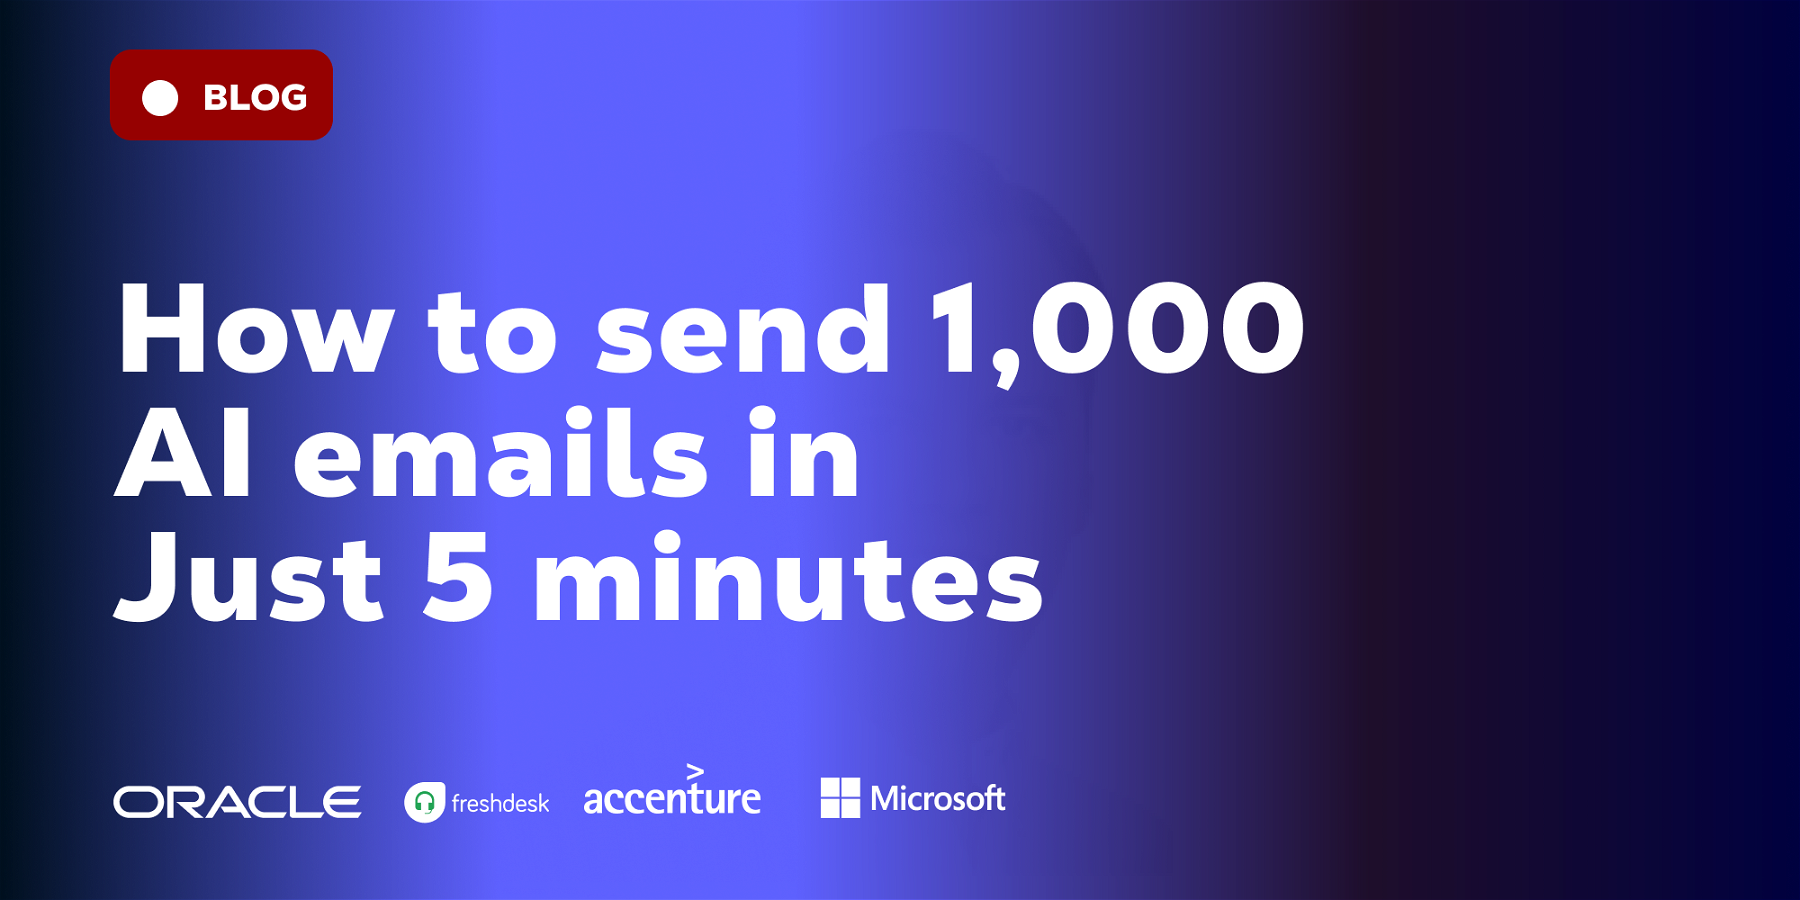 How to send 1,000 AI emails in 5 minutes